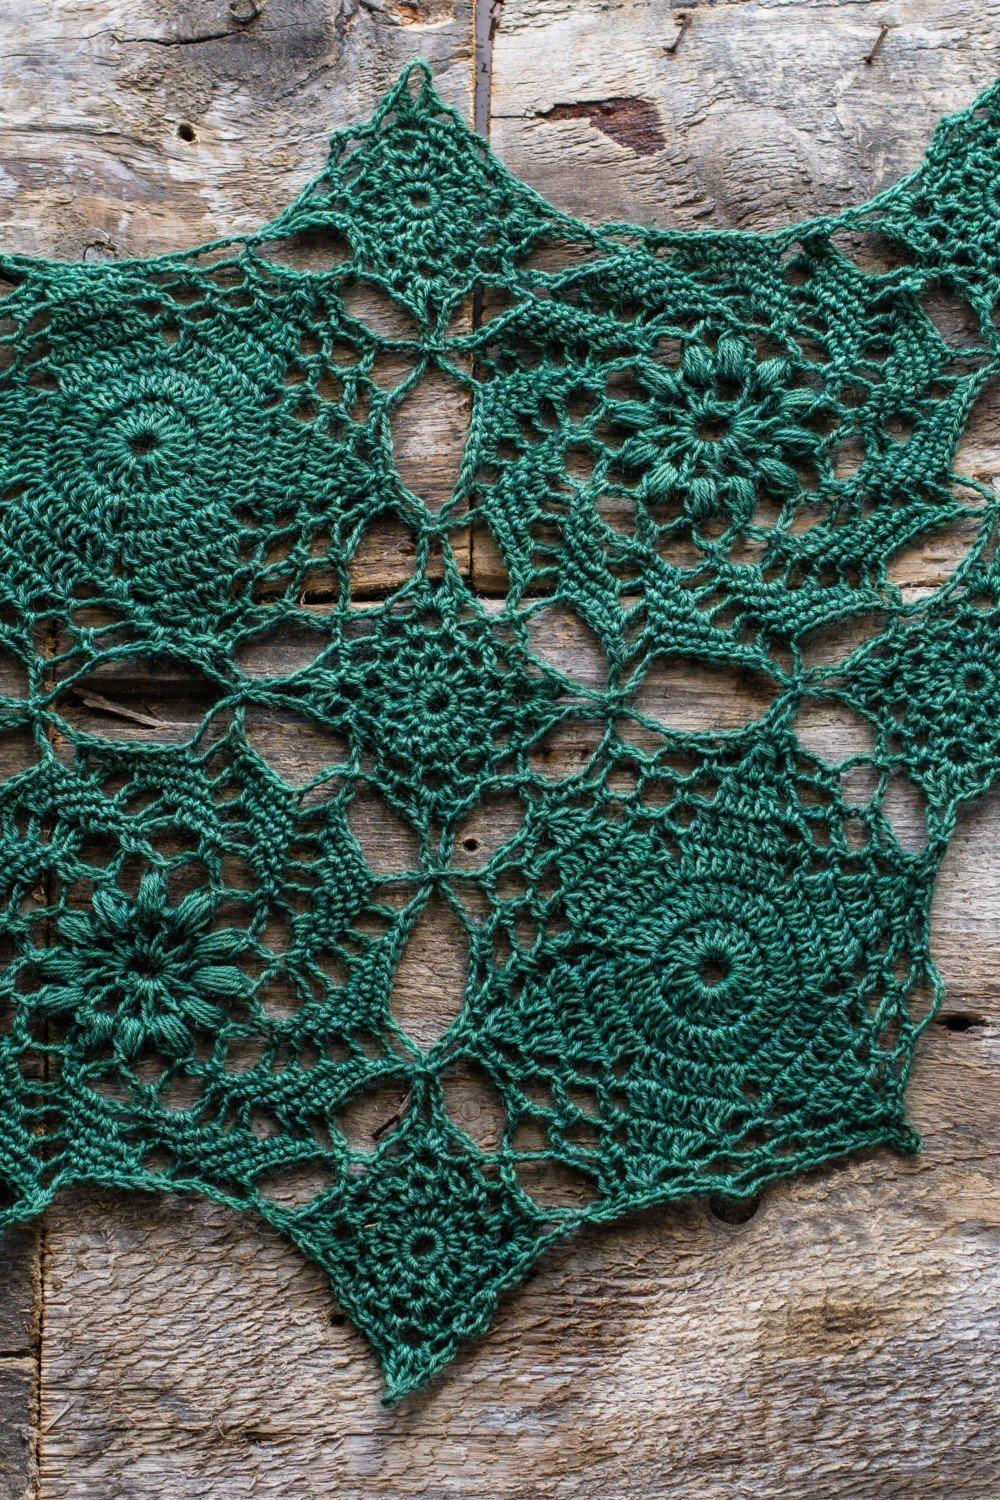 The Crochet Project The Shawl Project Book One -  - Crochet Book